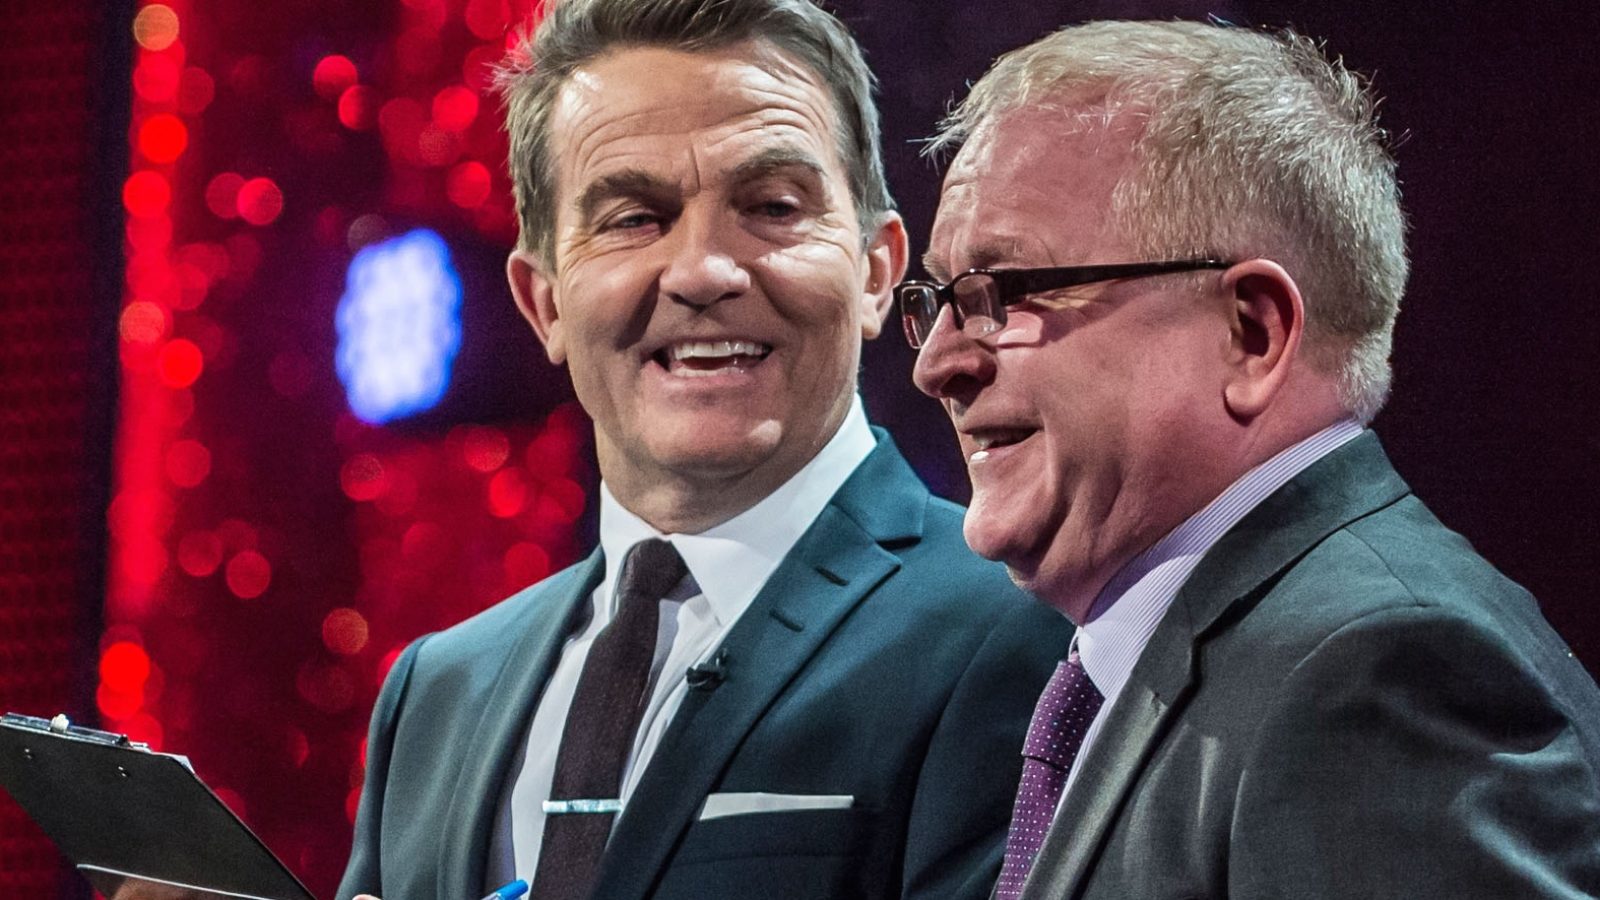 Strictly embargoed until 00:01  26th April 2016

Tonight at the London Palladium on Wednesday 4th May 2016

SHOW FOUR

Picture shows: BARRY PEDEN with host BRADLEY WALSH

Tonight At The London Palladium will be hosted by entertainer, actor and presenter Bradley Walsh who with his warmth and cheeky style will entertain audiences with plenty of surprises and introduce some of the biggest stars from music and comedy onto one of the world’s most famous stages, along with a host of spectacular speciality acts from around the world.

In tonight’s show guests confirmed include; Grammy award-winner Billy Ocean, magician Ben Hanlin, music from American singer-songwriter Rachel Platten, singer Julian Ovenden, Japanese comedy duo and speciality act Gamarjobat and comedy from Paul Sinha.